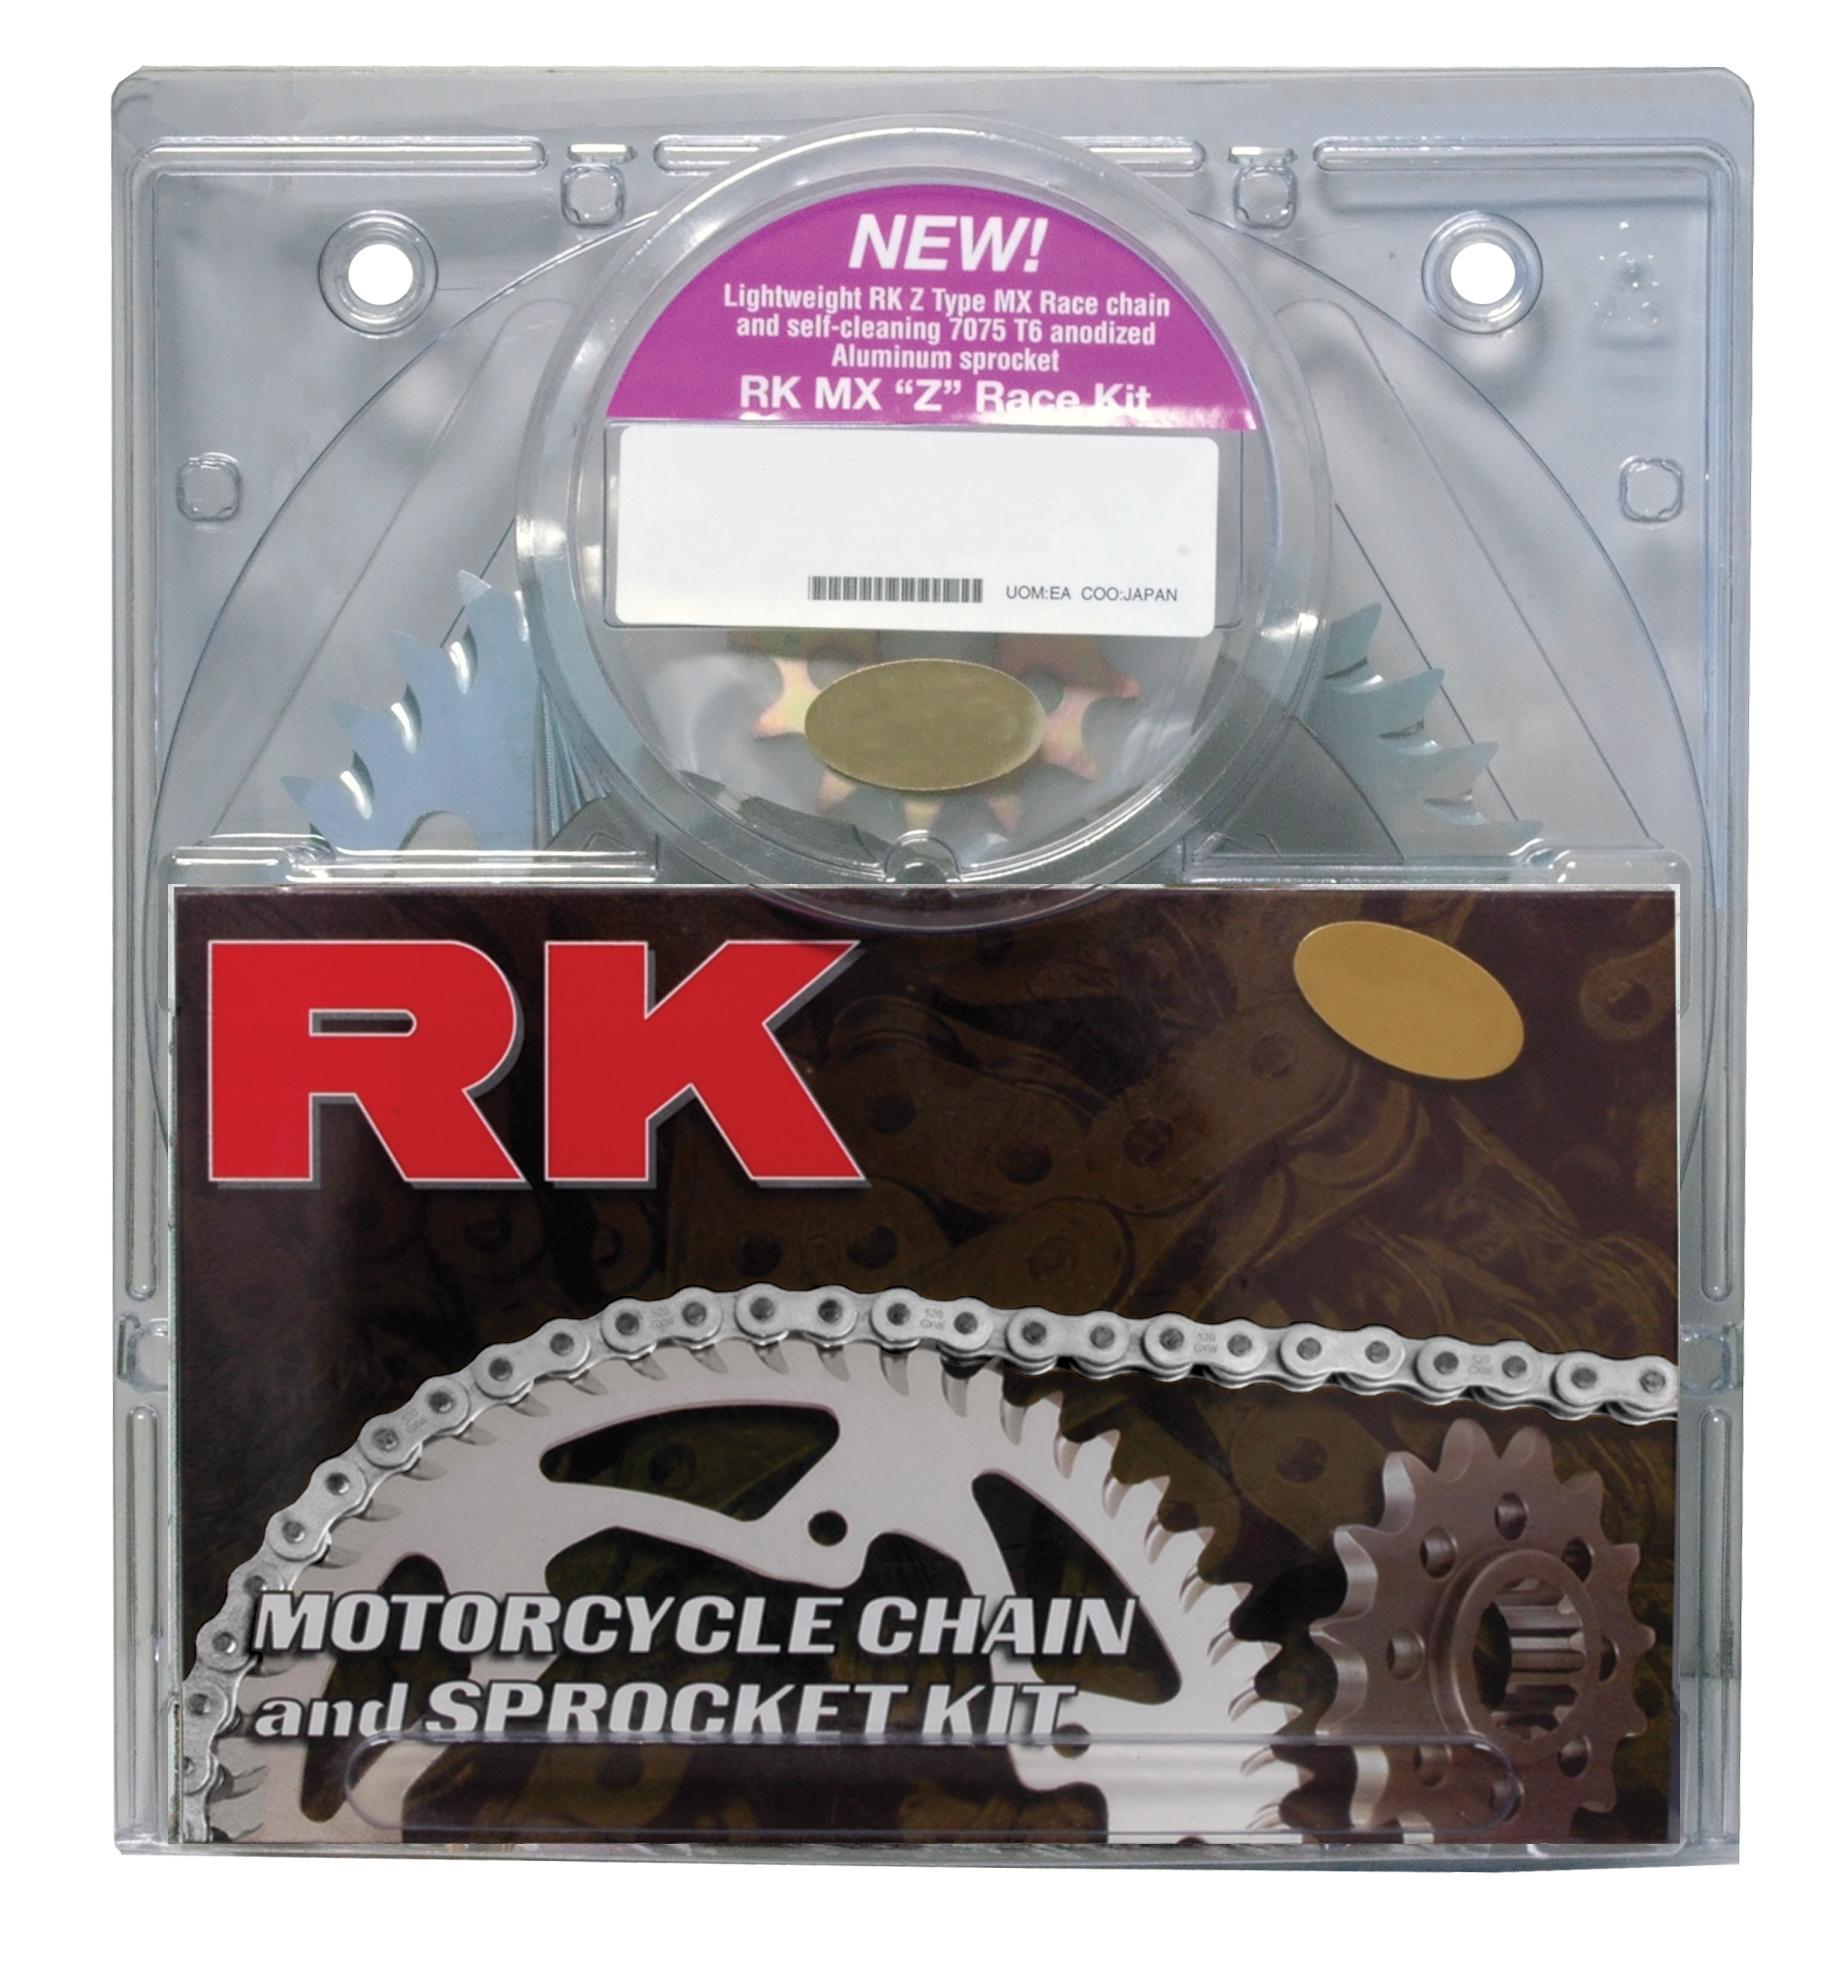 GB520MXZ4-116 Chain 14/50 Silver Aluminum Sprocket Kit - RK Excel Chain & Sprocket Kit - Click Image to Close